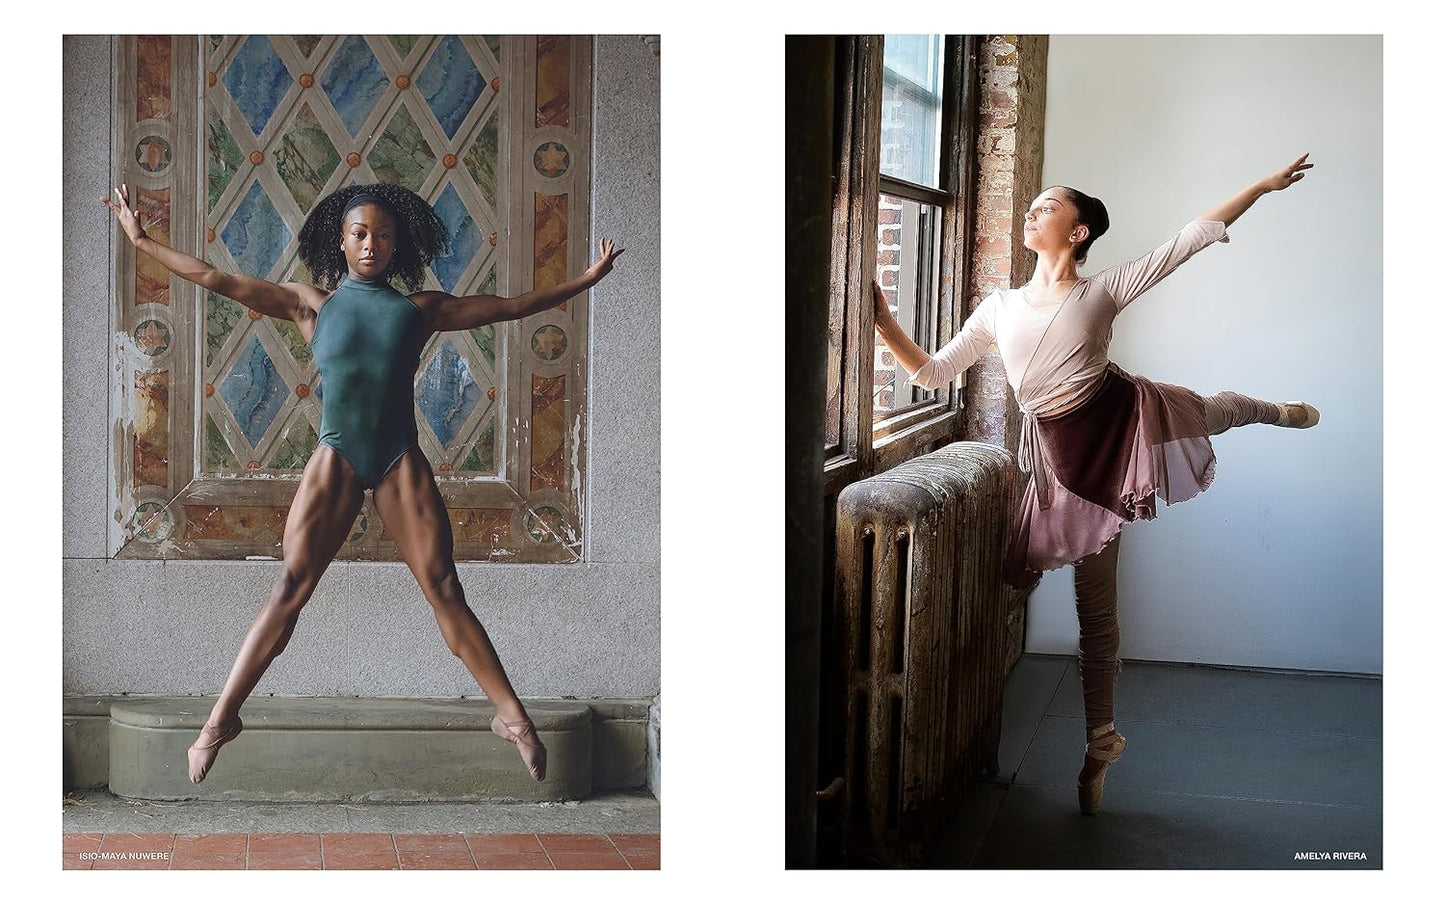 The Color of Dance // A Celebration of Diversity and Inclusion in the World of Ballet